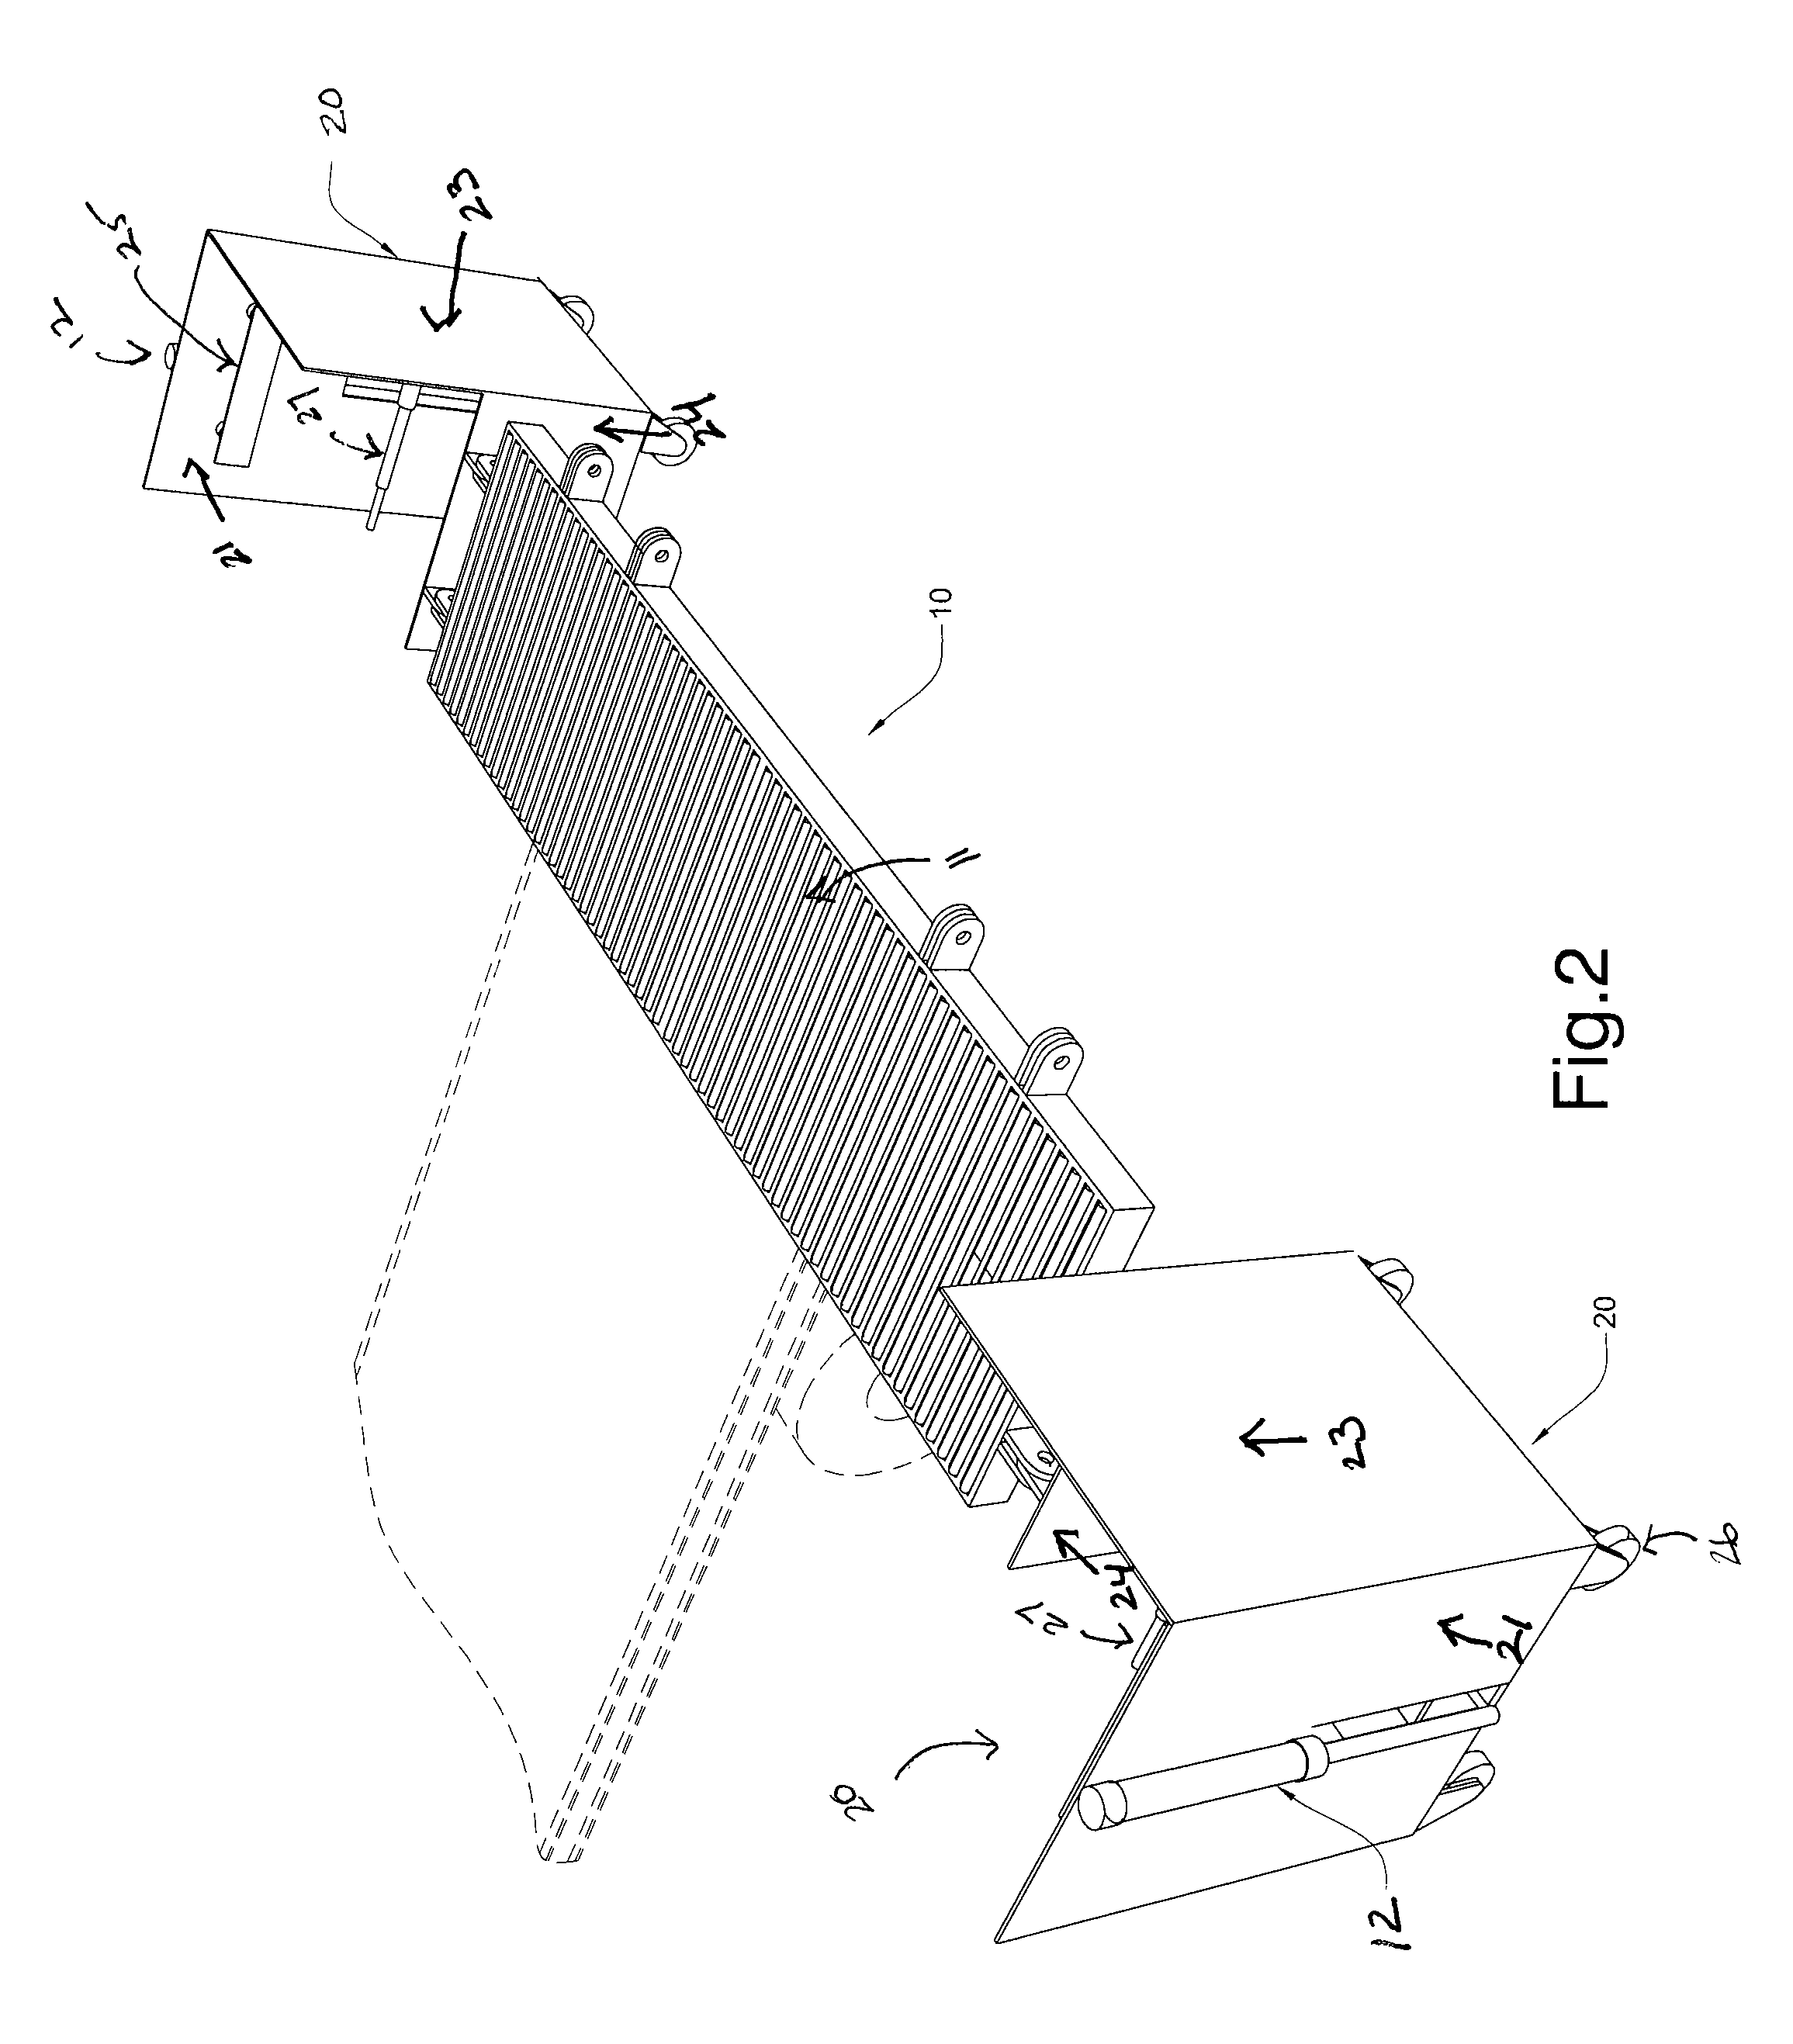 Apparatus for safety barrel placement and removal